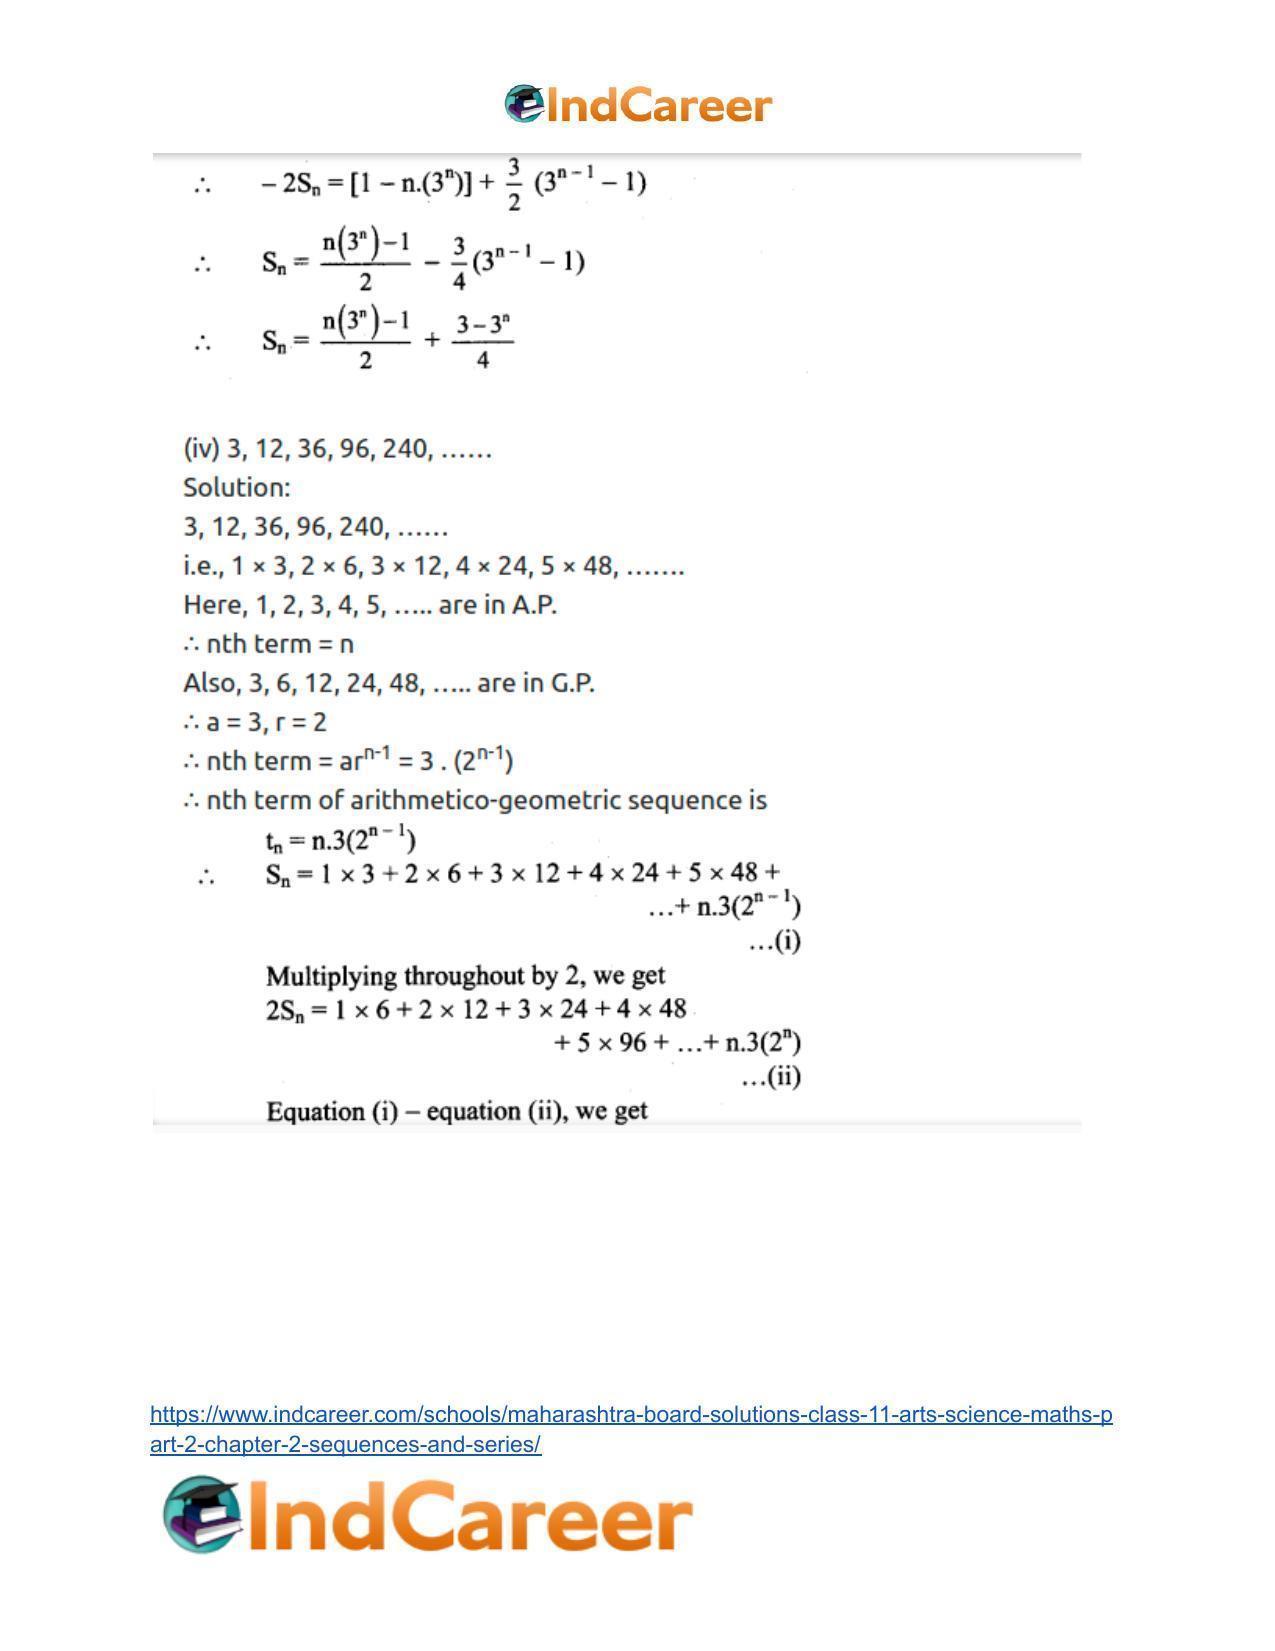 Maharashtra Board Solutions Class 11-Arts & Science Maths (Part 2): Chapter 2- Sequences and Series - Page 63